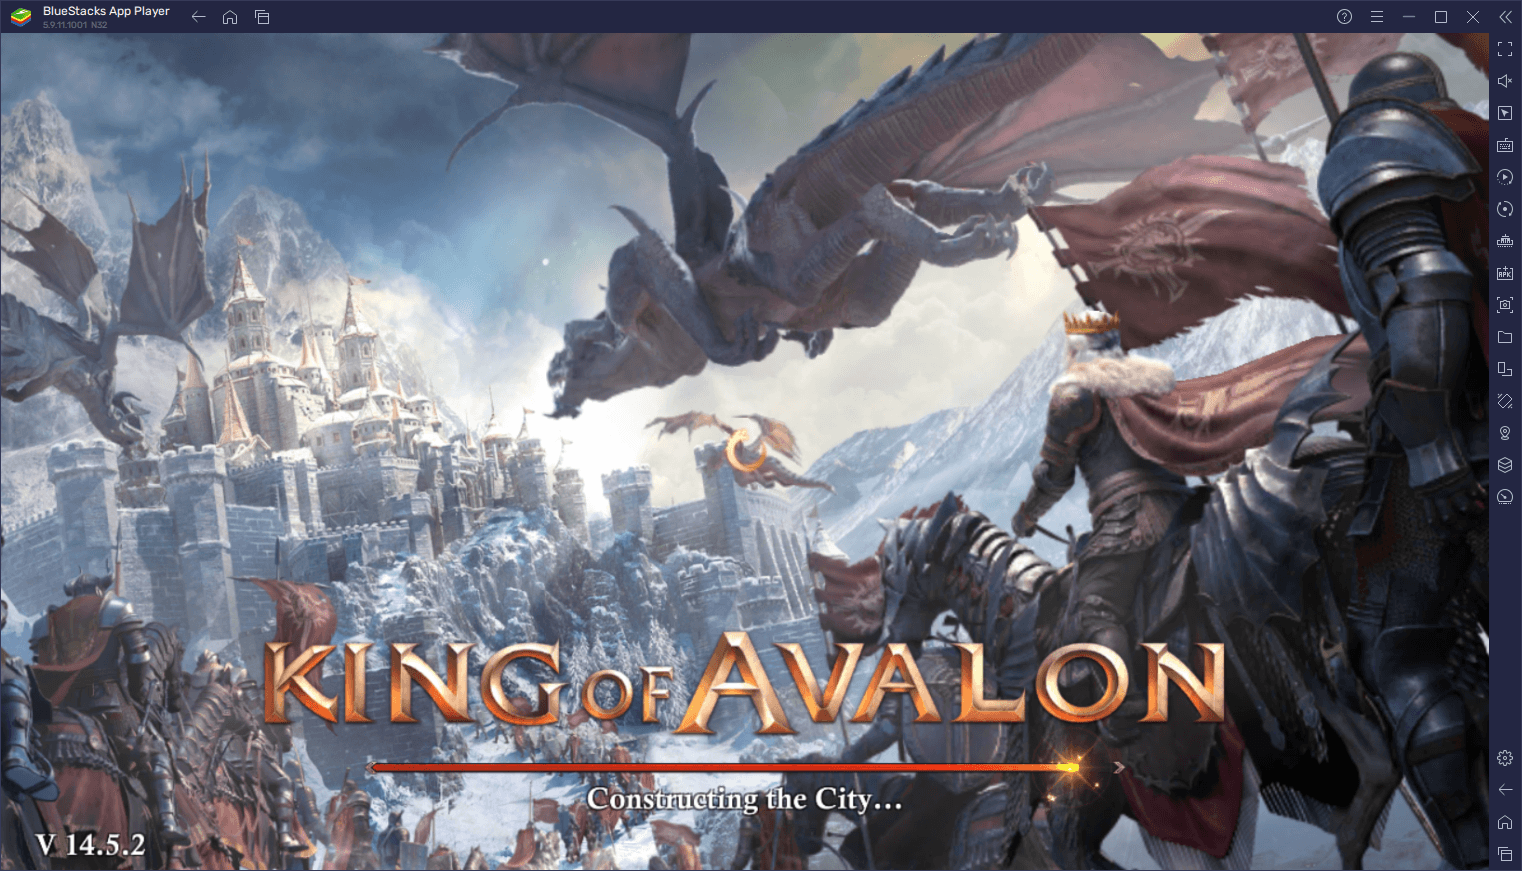 King of Avalon on PC - How to Use Our BlueStacks Tools to Build the Strongest Empire with Ease